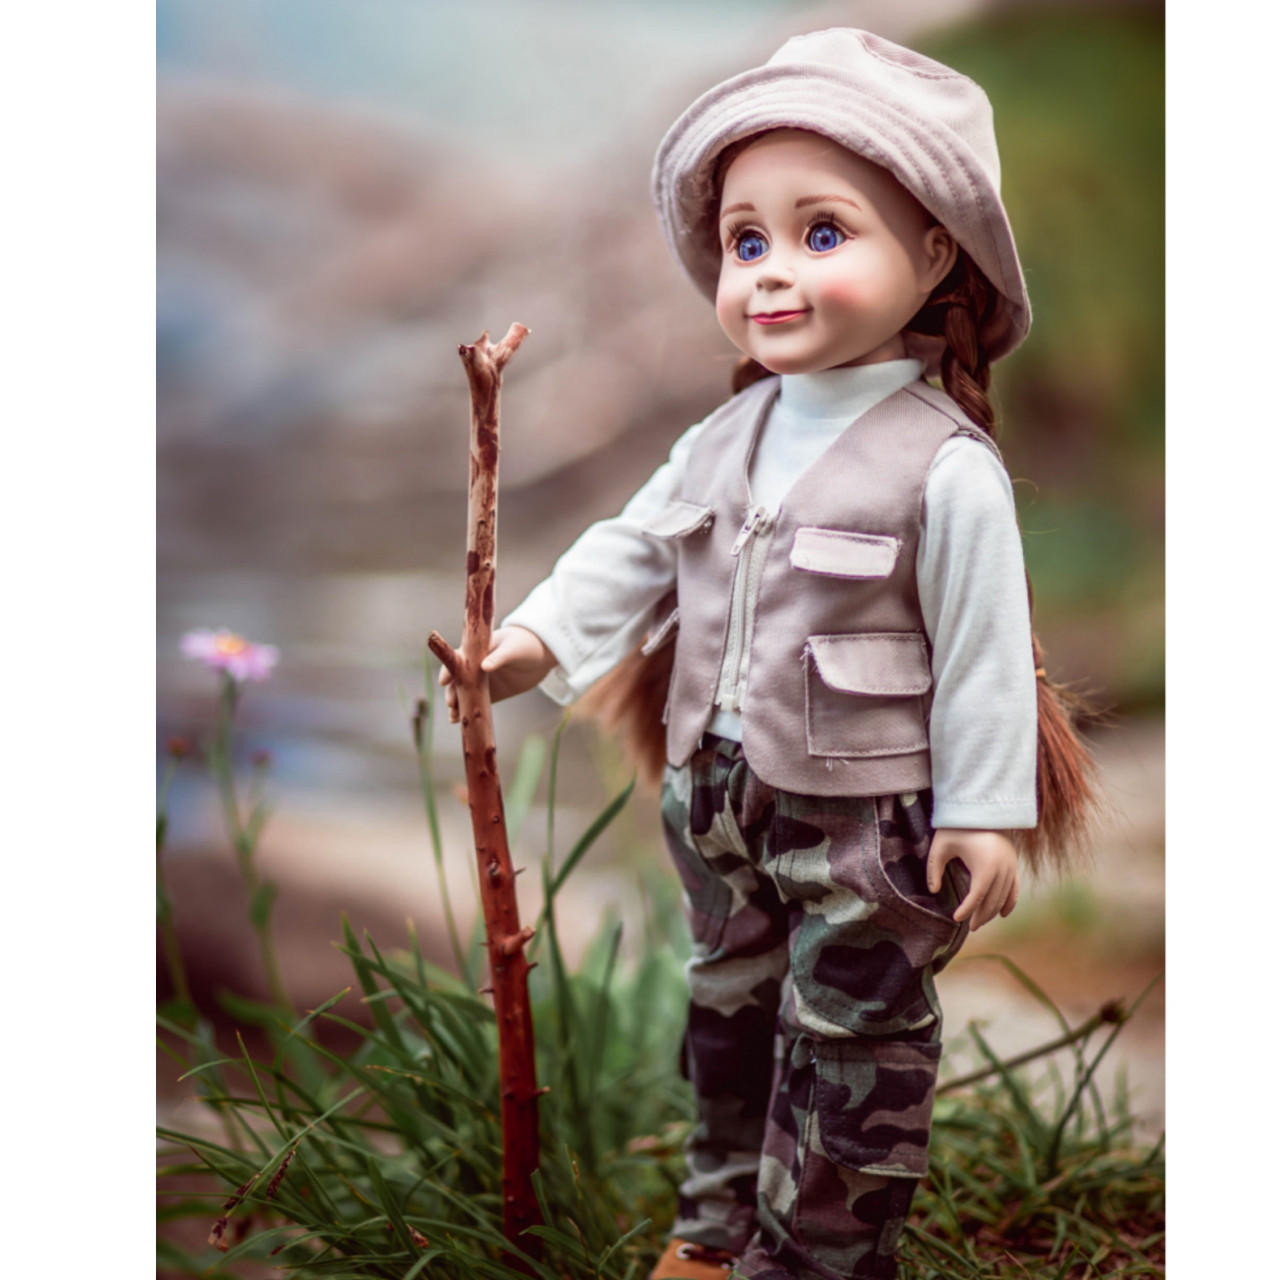 https://cdn11.bigcommerce.com/s-m5vcu70215/images/stencil/1280x1280/products/135/2150/the-queens-treasures-4-piece-fishing-adventure-outfit-clothes-for-18-inch-dolls__02810.1711594875.jpg?c=1